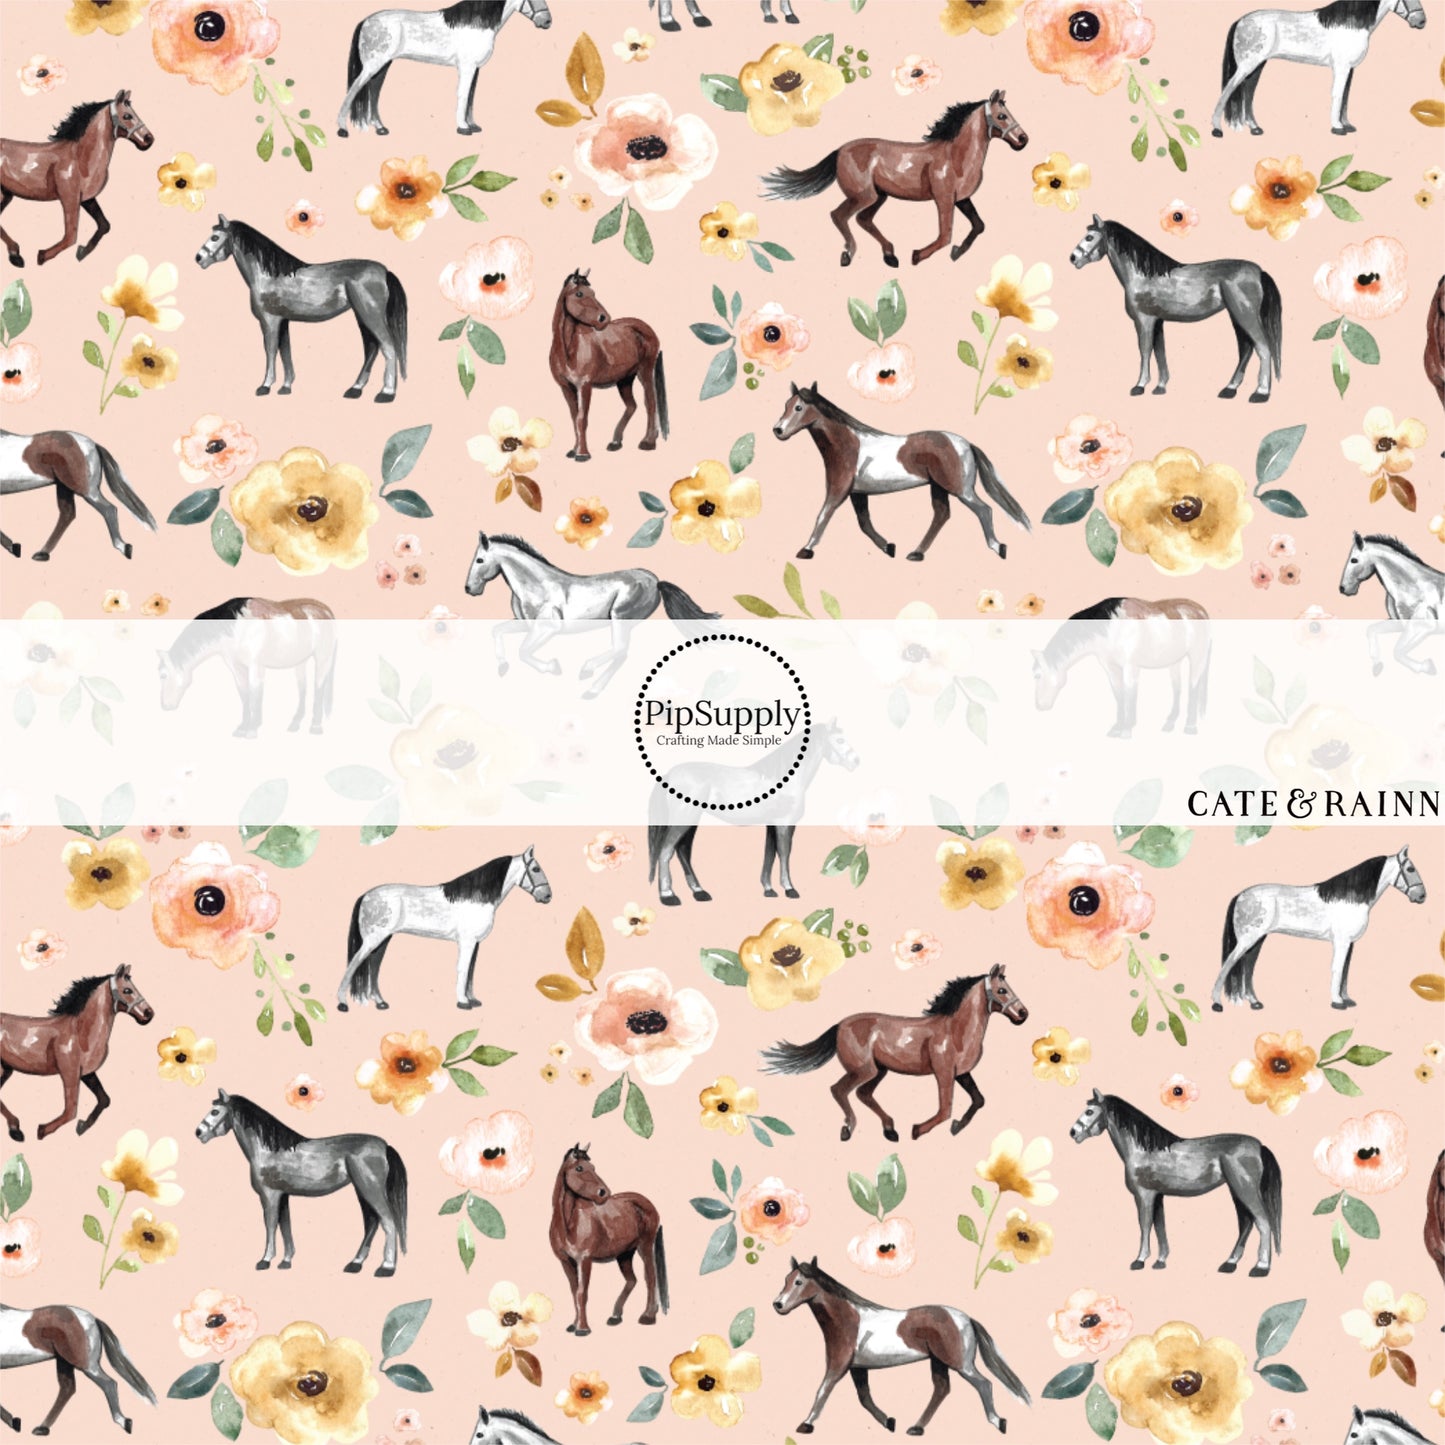 Horses and Spring Florals on Peach Fabric by the Yard.